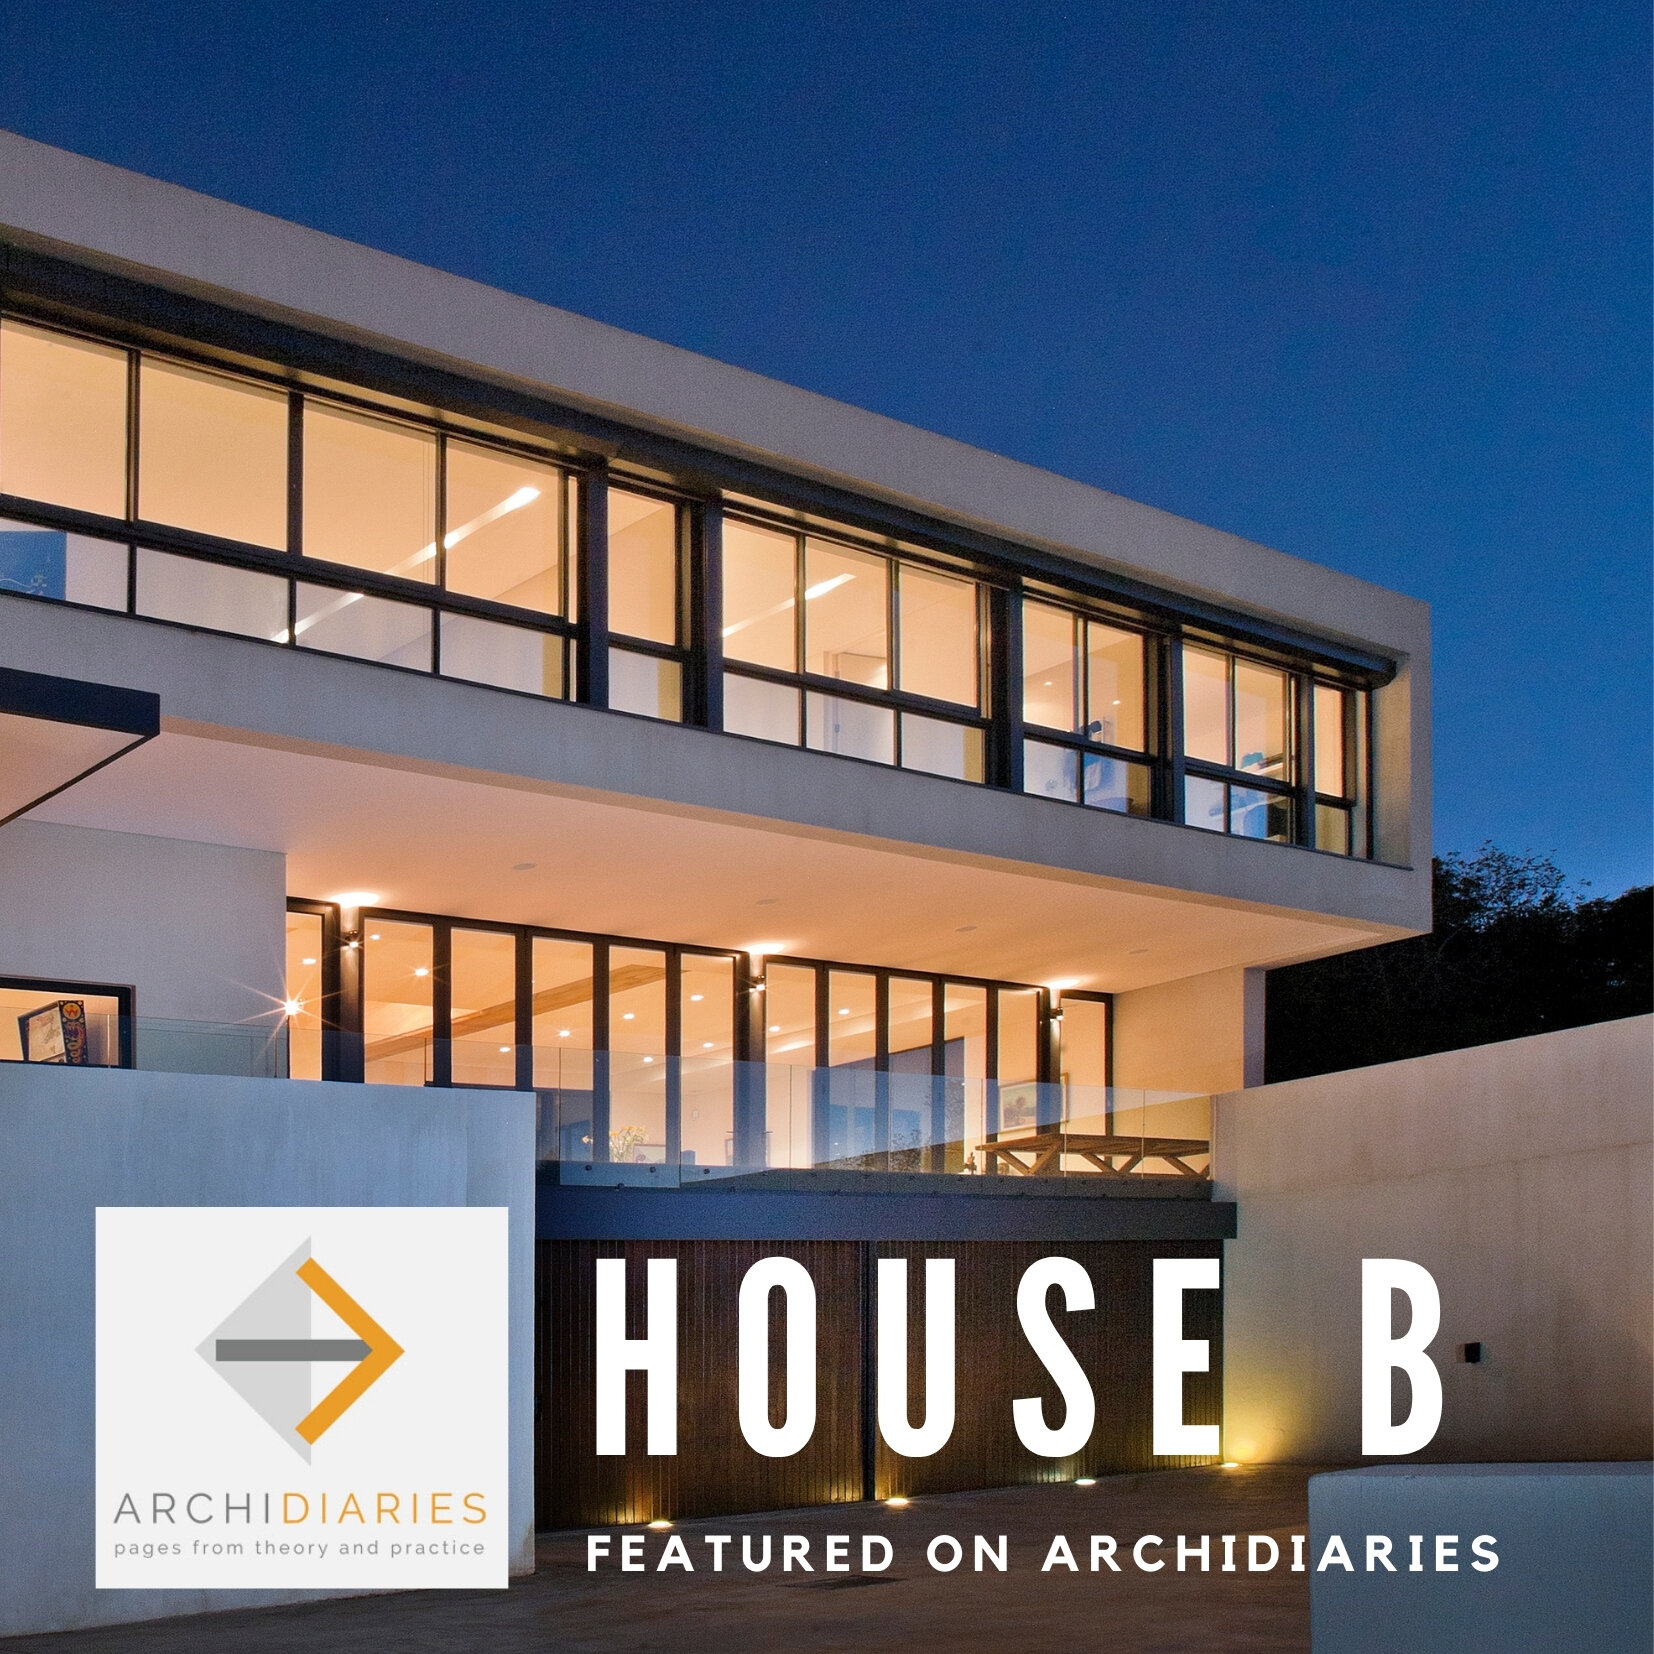 House B featured on ArchiDiaries